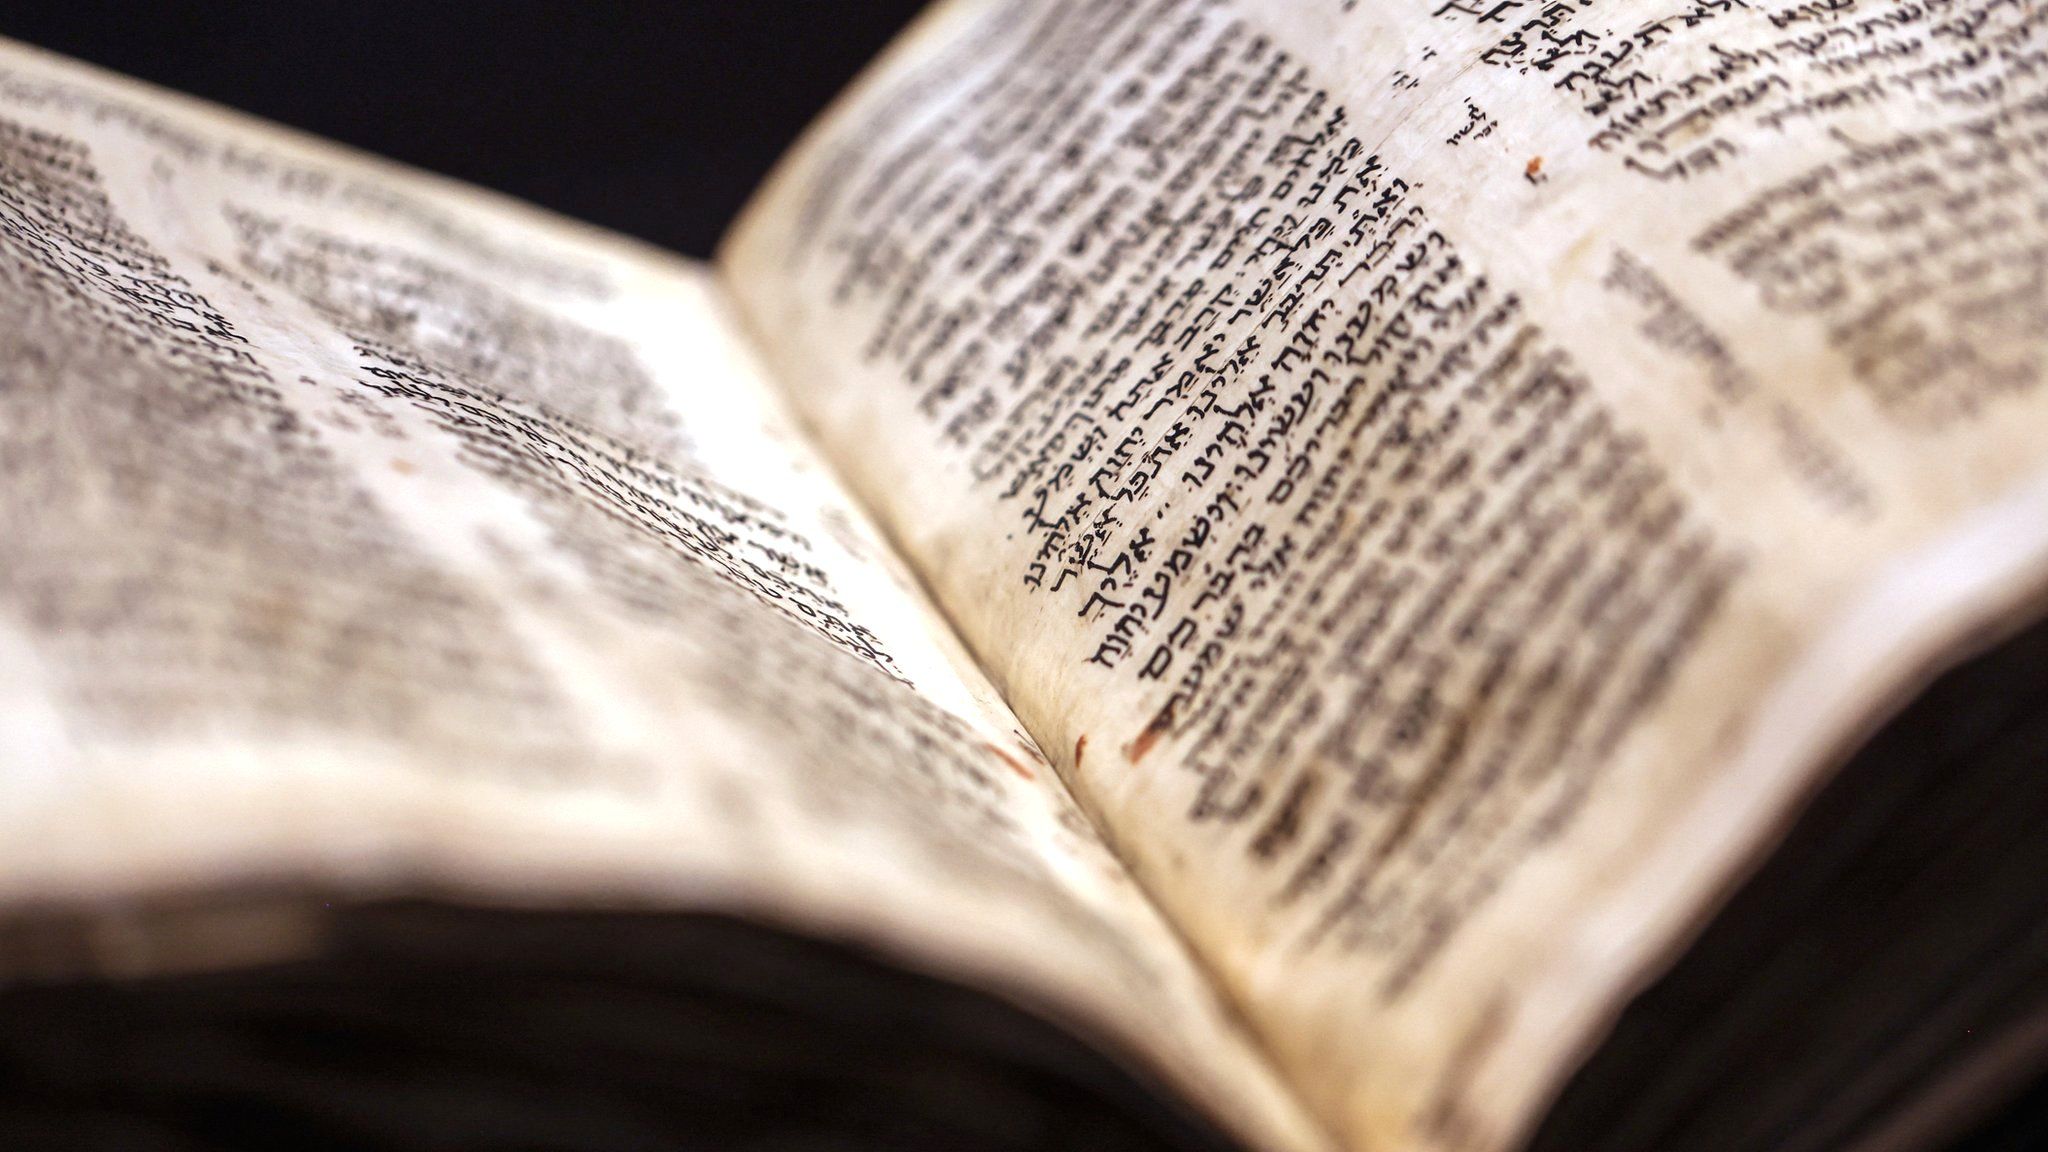 The Codex Sassoon, the oldest most complete Hebrew Bible, on display at the ANU Museum of the Jewish People in Tel Aviv, Israel (22 March 2023)